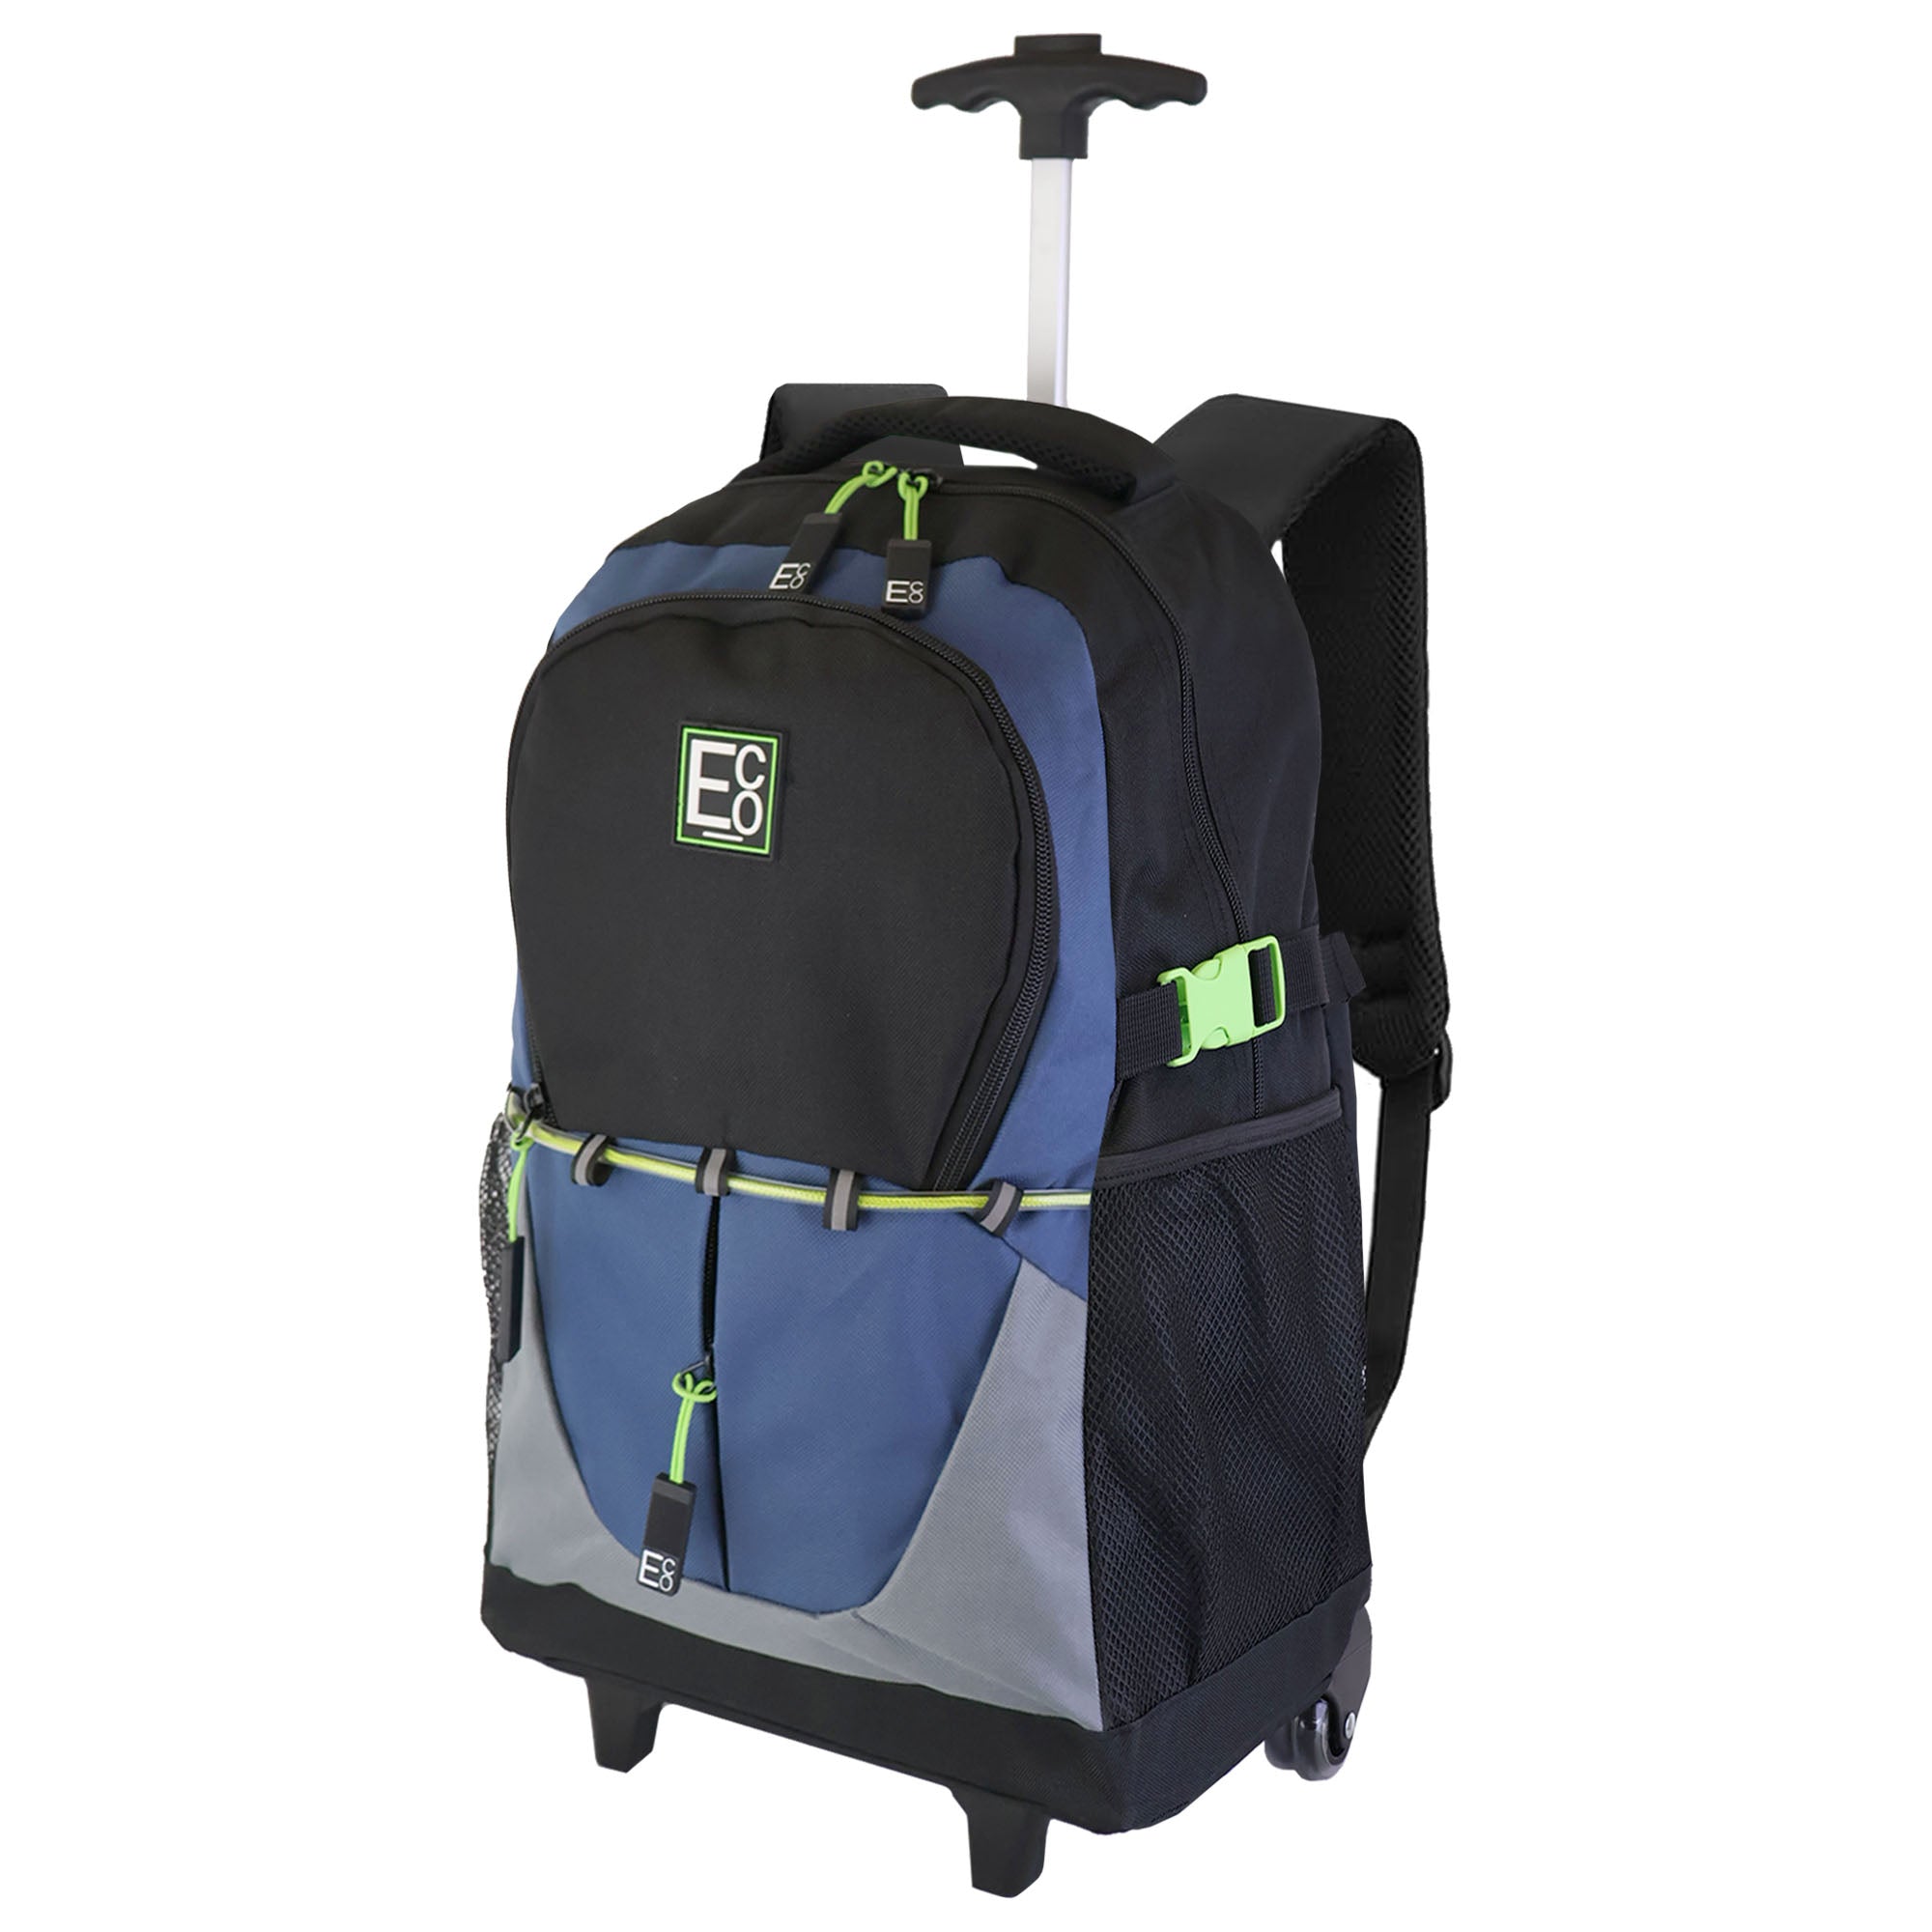 Telescopic Trolley Backpack with Roller Ball Wheels - Navy